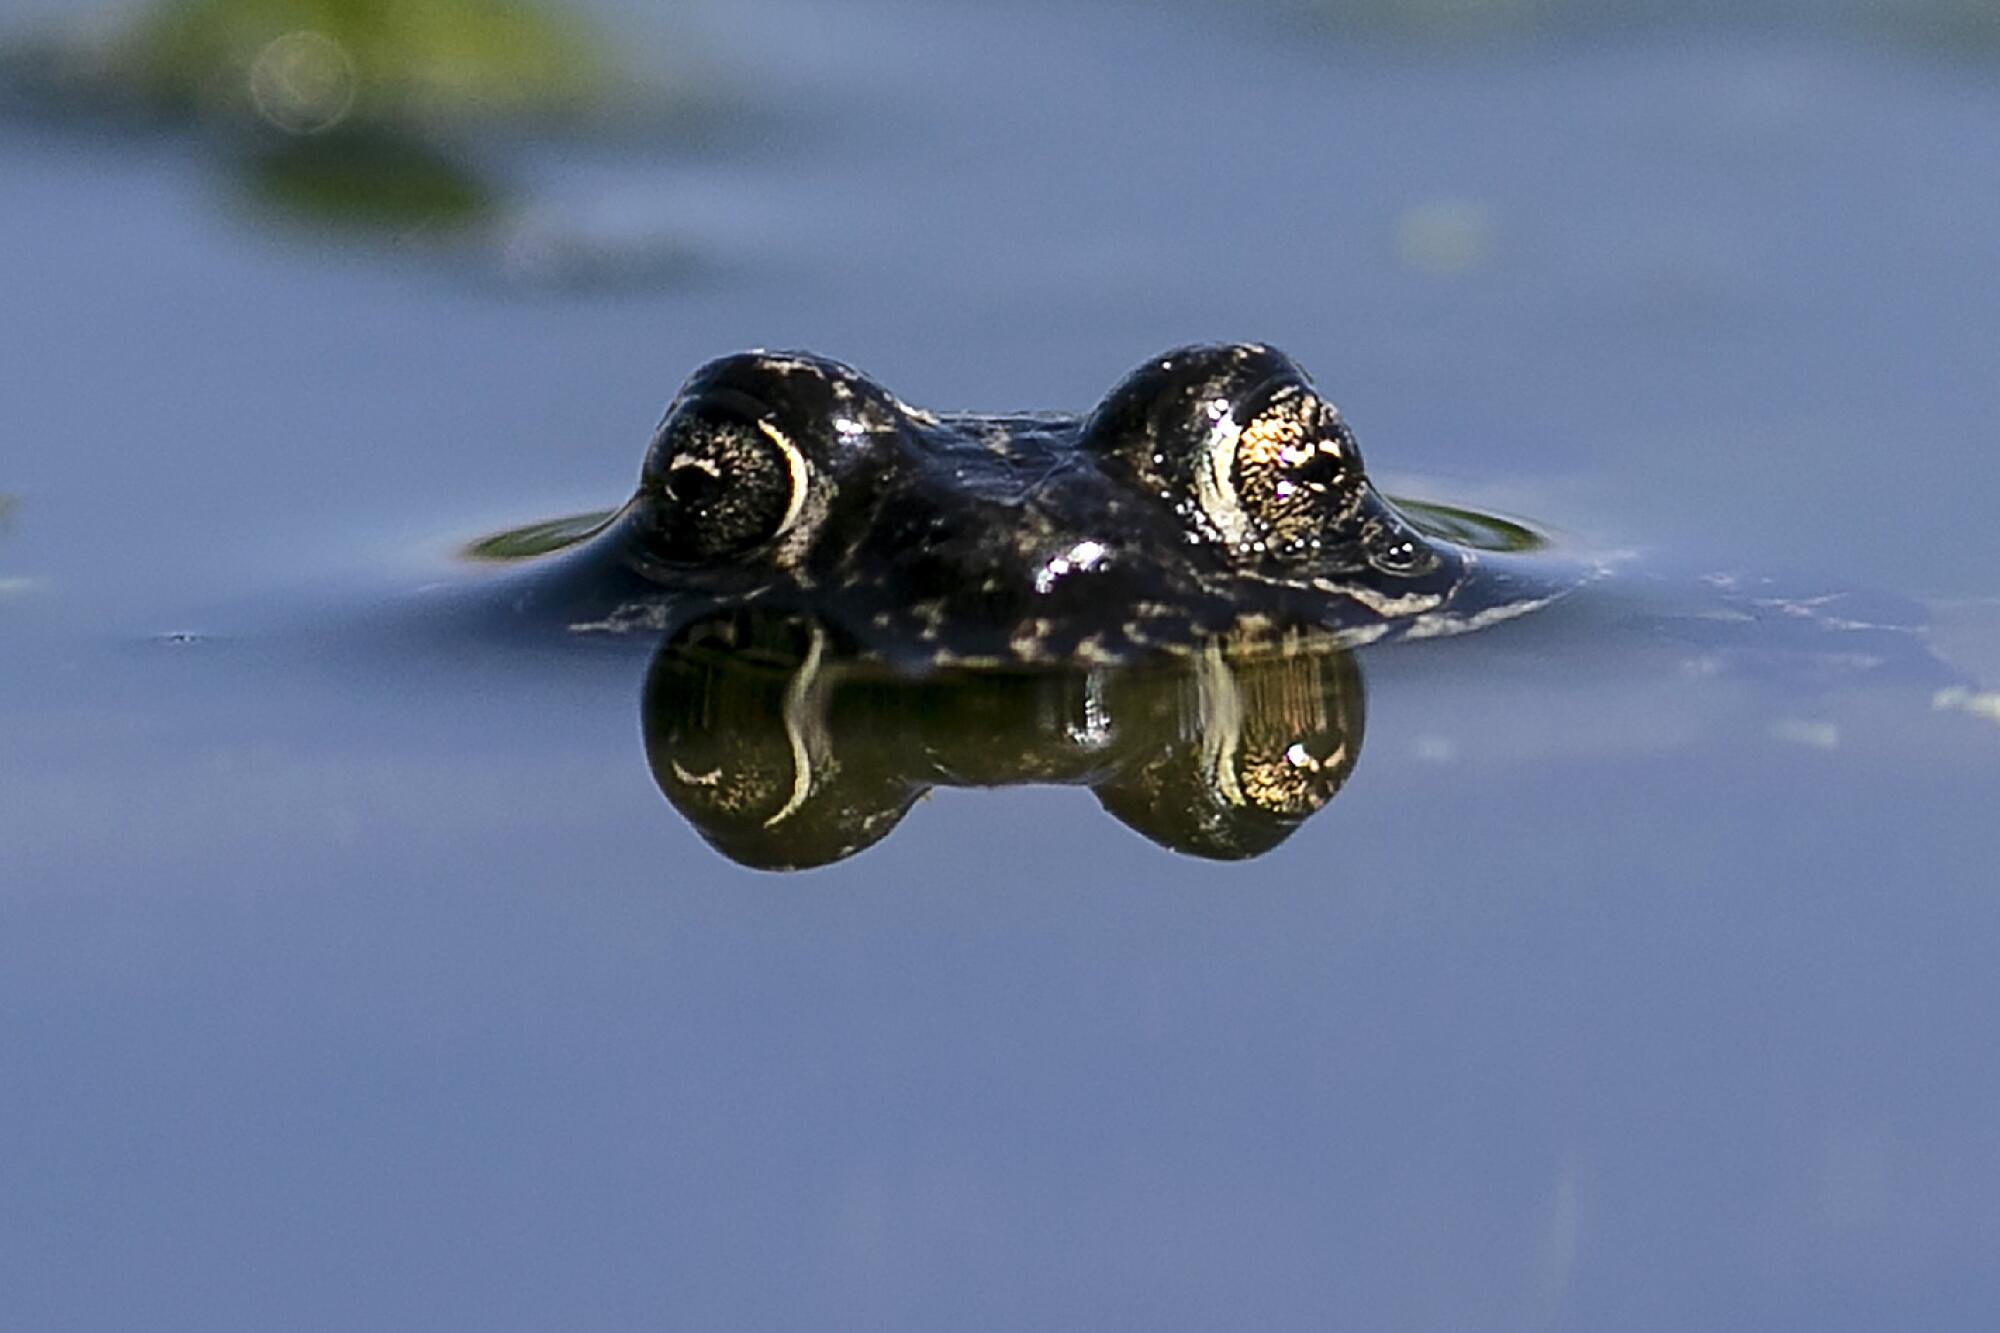 The eyes of a submerged black toad protrude above the waters of Deep Valley Springs